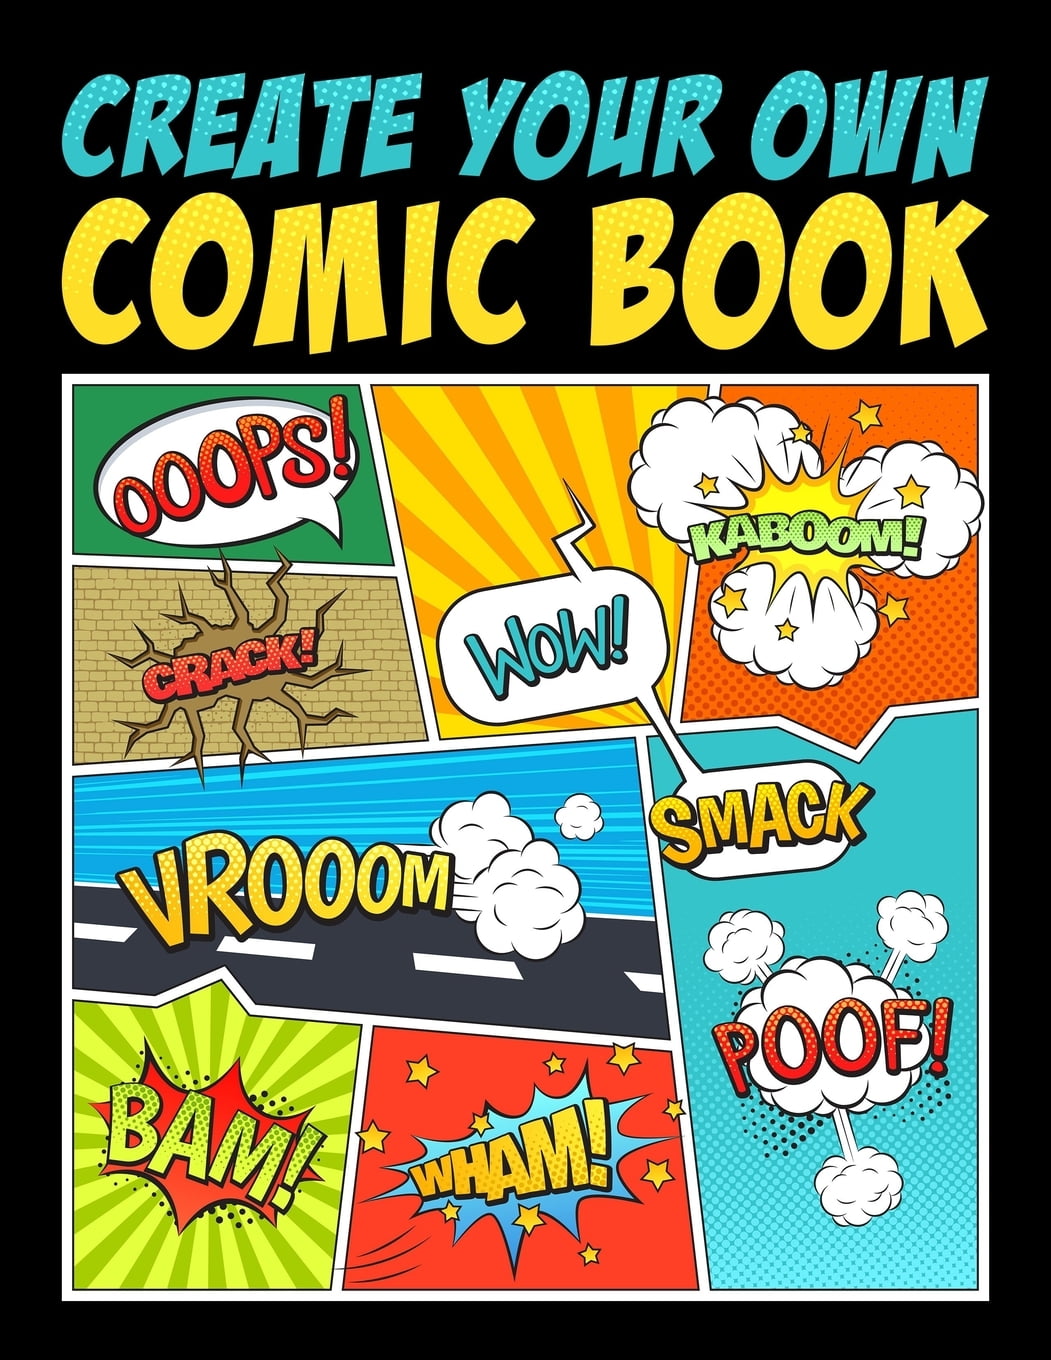 Comic Nero Anime Art Supplies For Teens: Blank Comic Book to Create Your  Own Comics for Teens Kids and Adults with 100 Variant Templates 